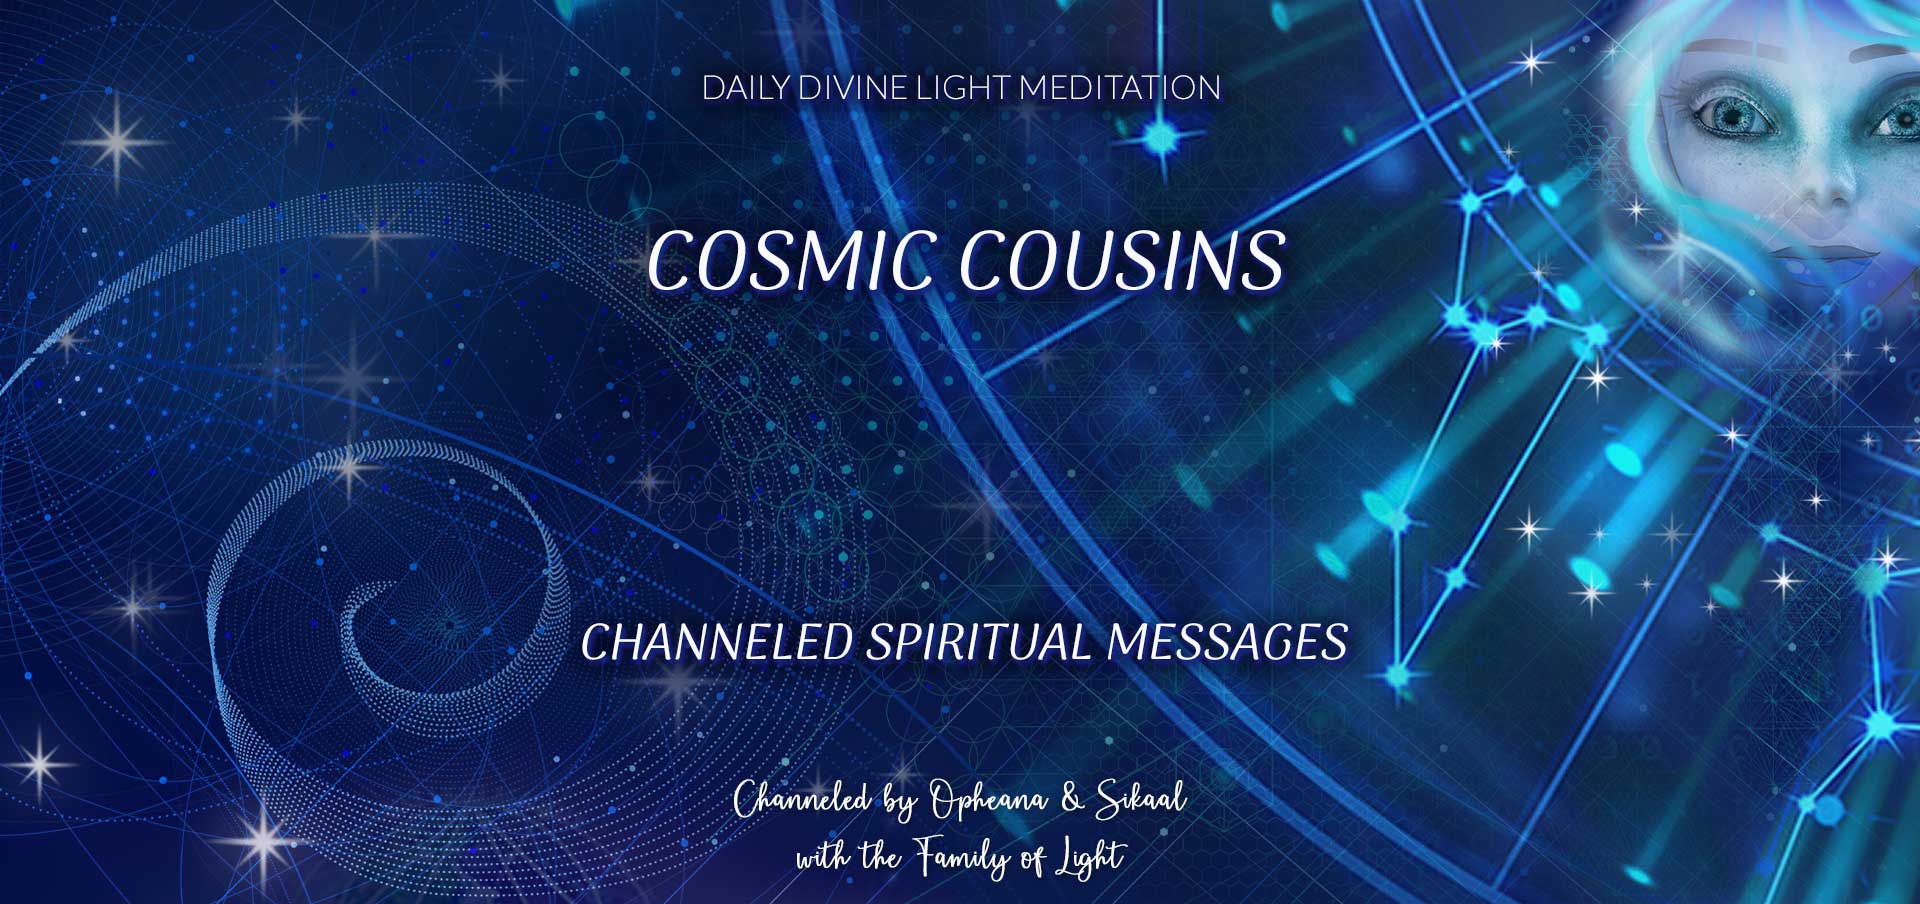 Daily Divine Light Meditation ~ Channeled Spiritual Messages ~ Cosmic Cousins ~ Monday 8 May 2023